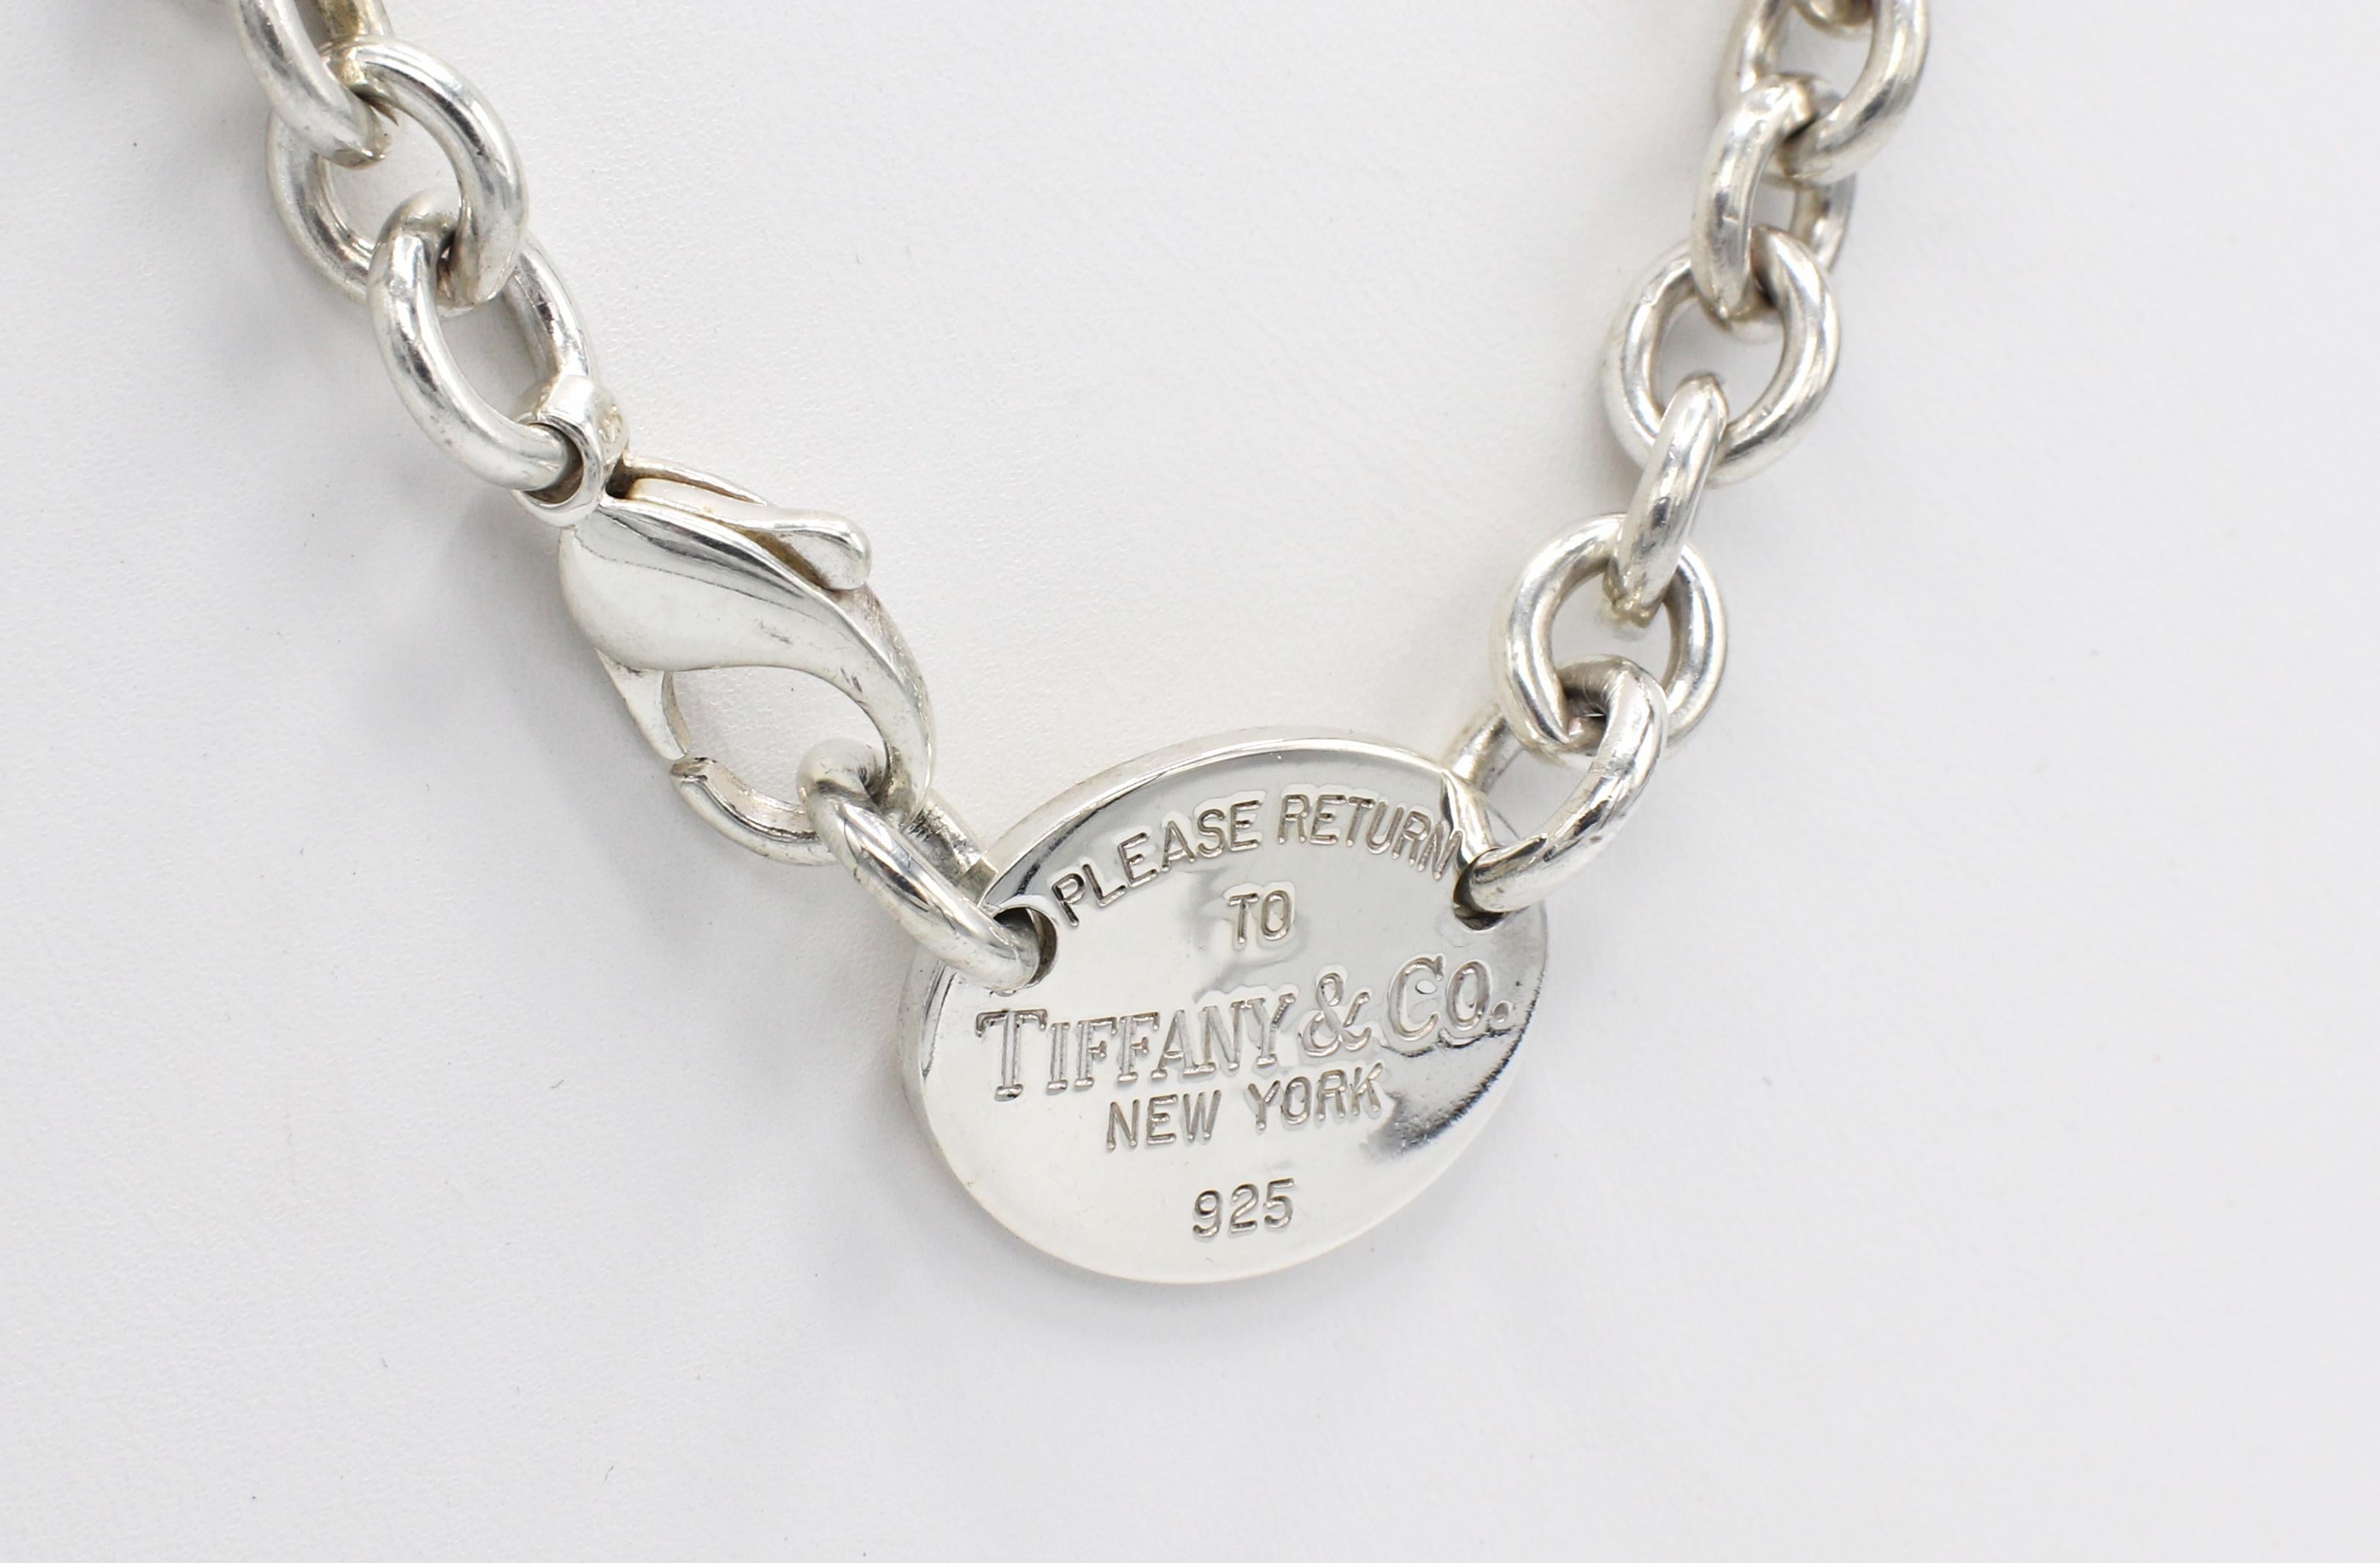 Tiffany & Co. Return to Tiffany Sterling Silver Oval Tag Link Chain Necklace 
Metal: Sterling silver
Weight: 51.6 grams
Links: 7.8mm
Length: 15.5 inches
Signed: 